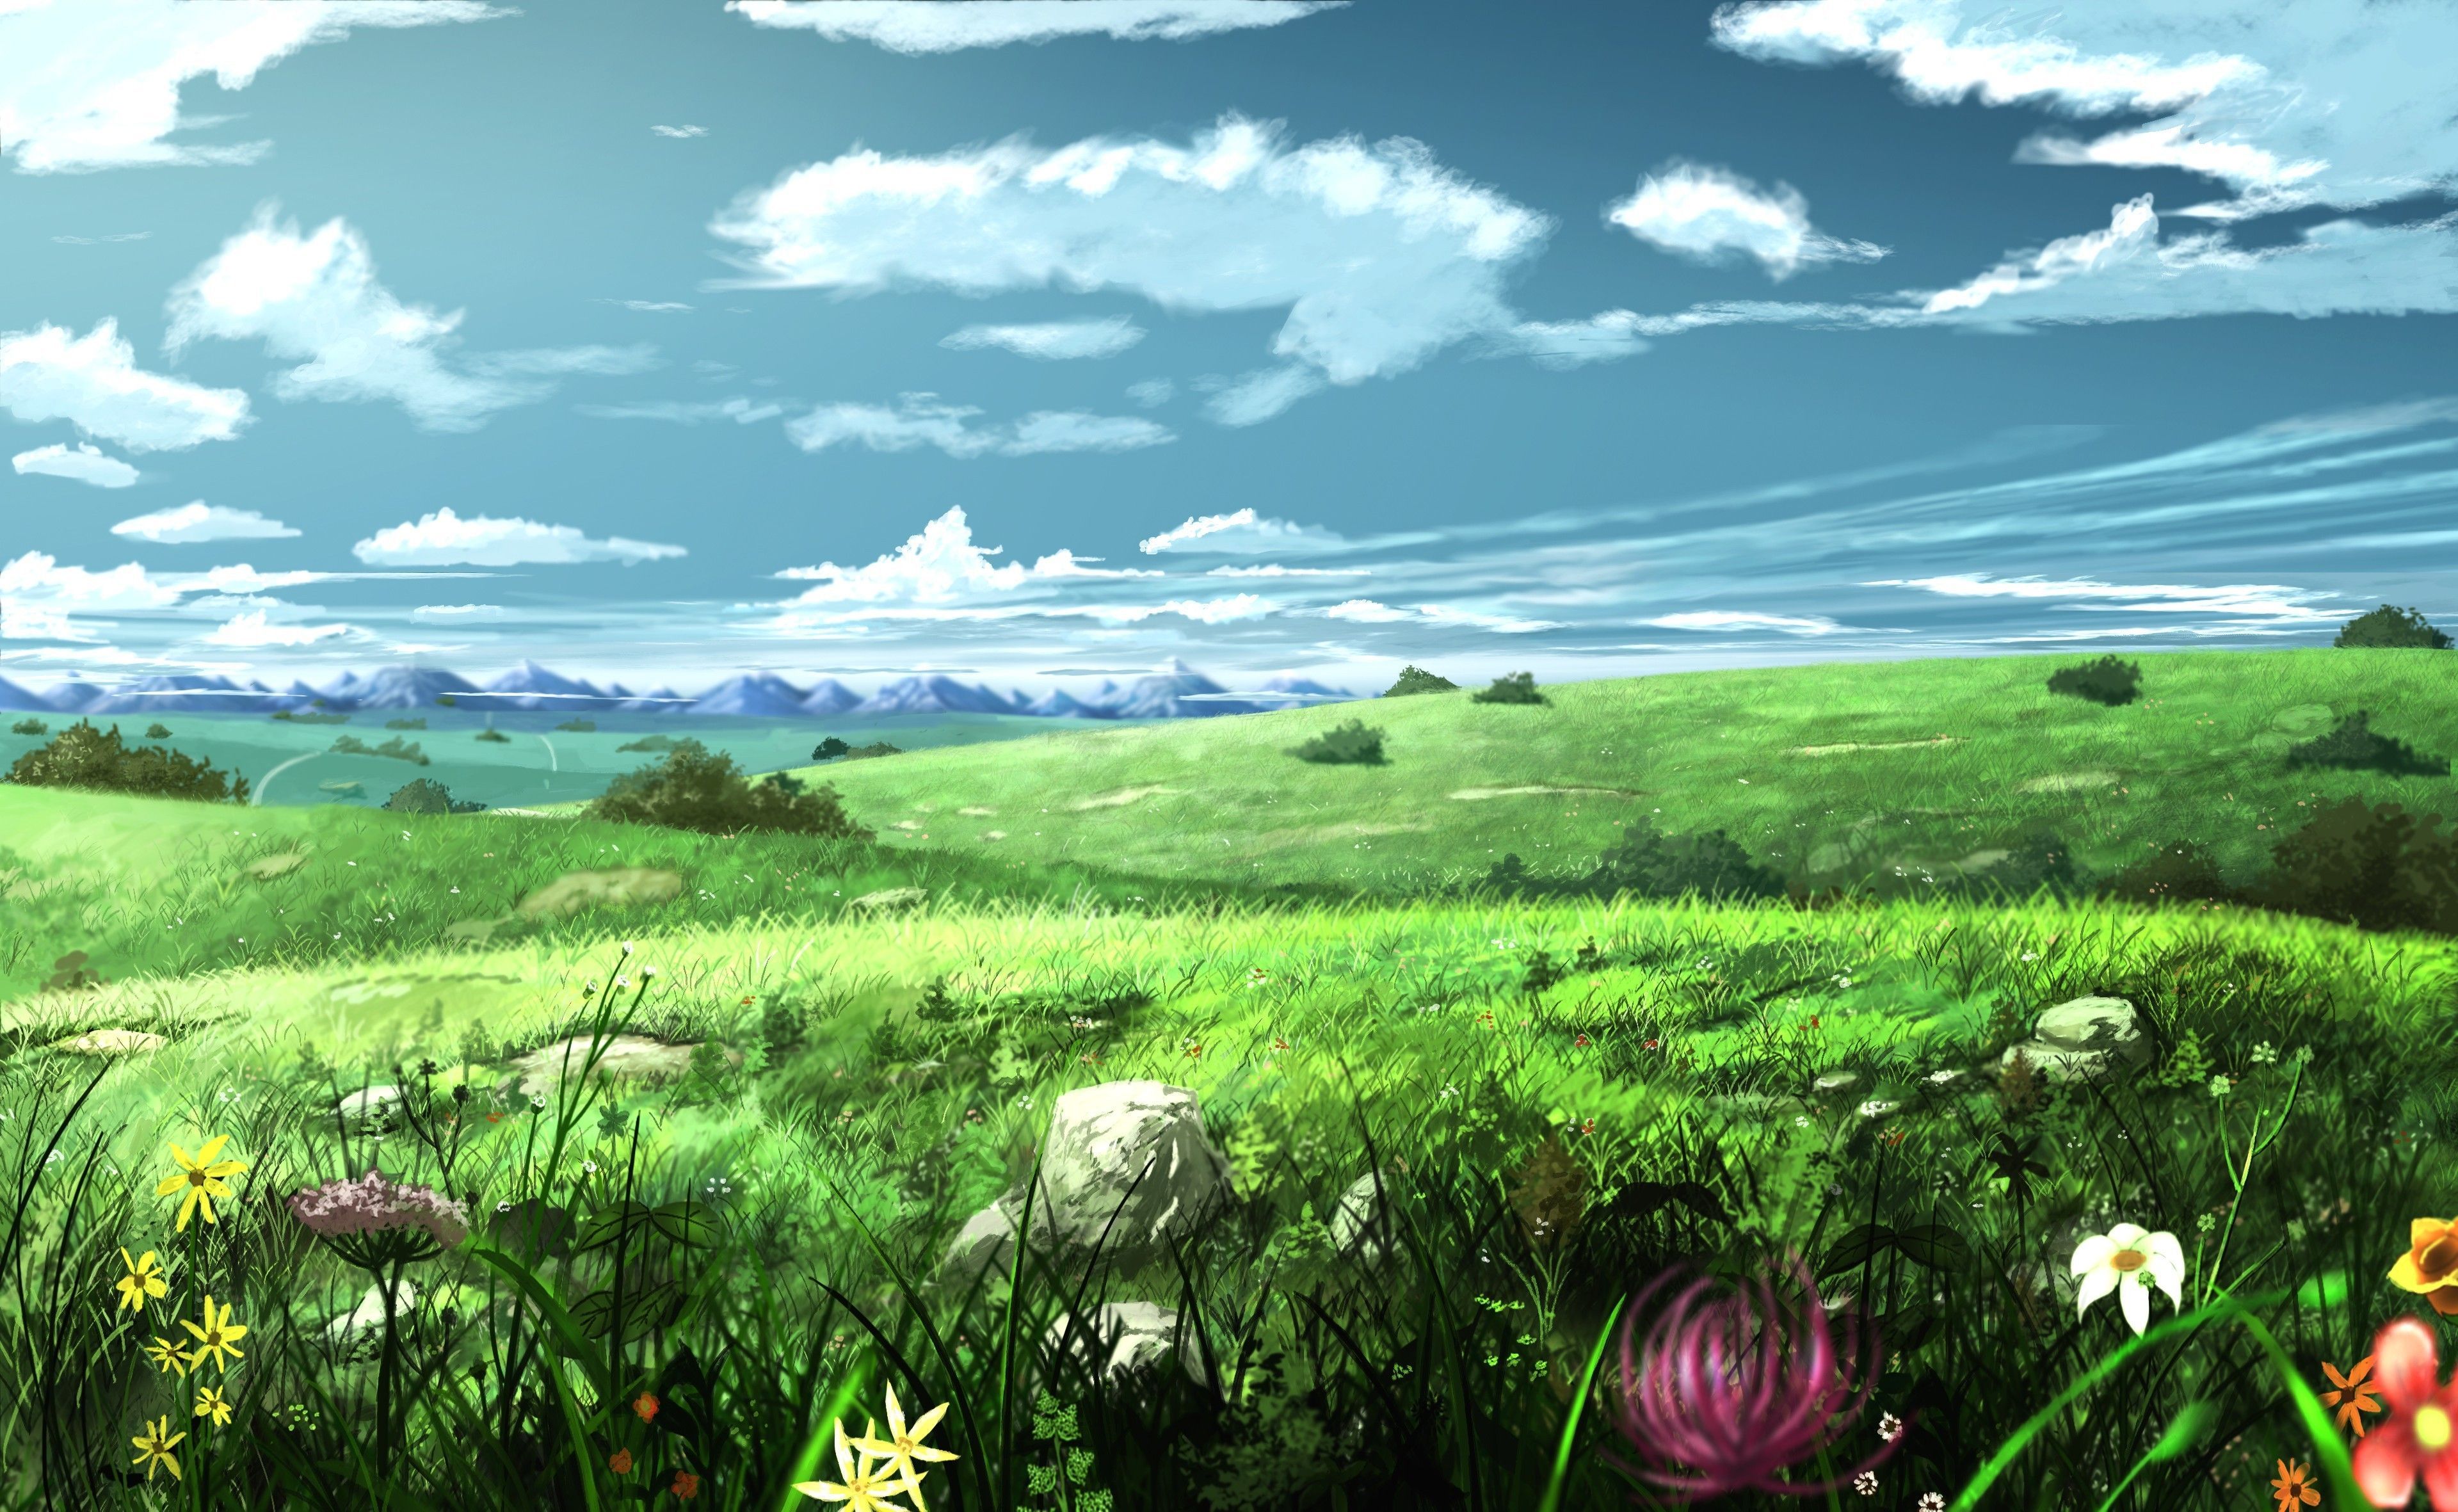 Green fields - Anime Style by AImages on DeviantArt